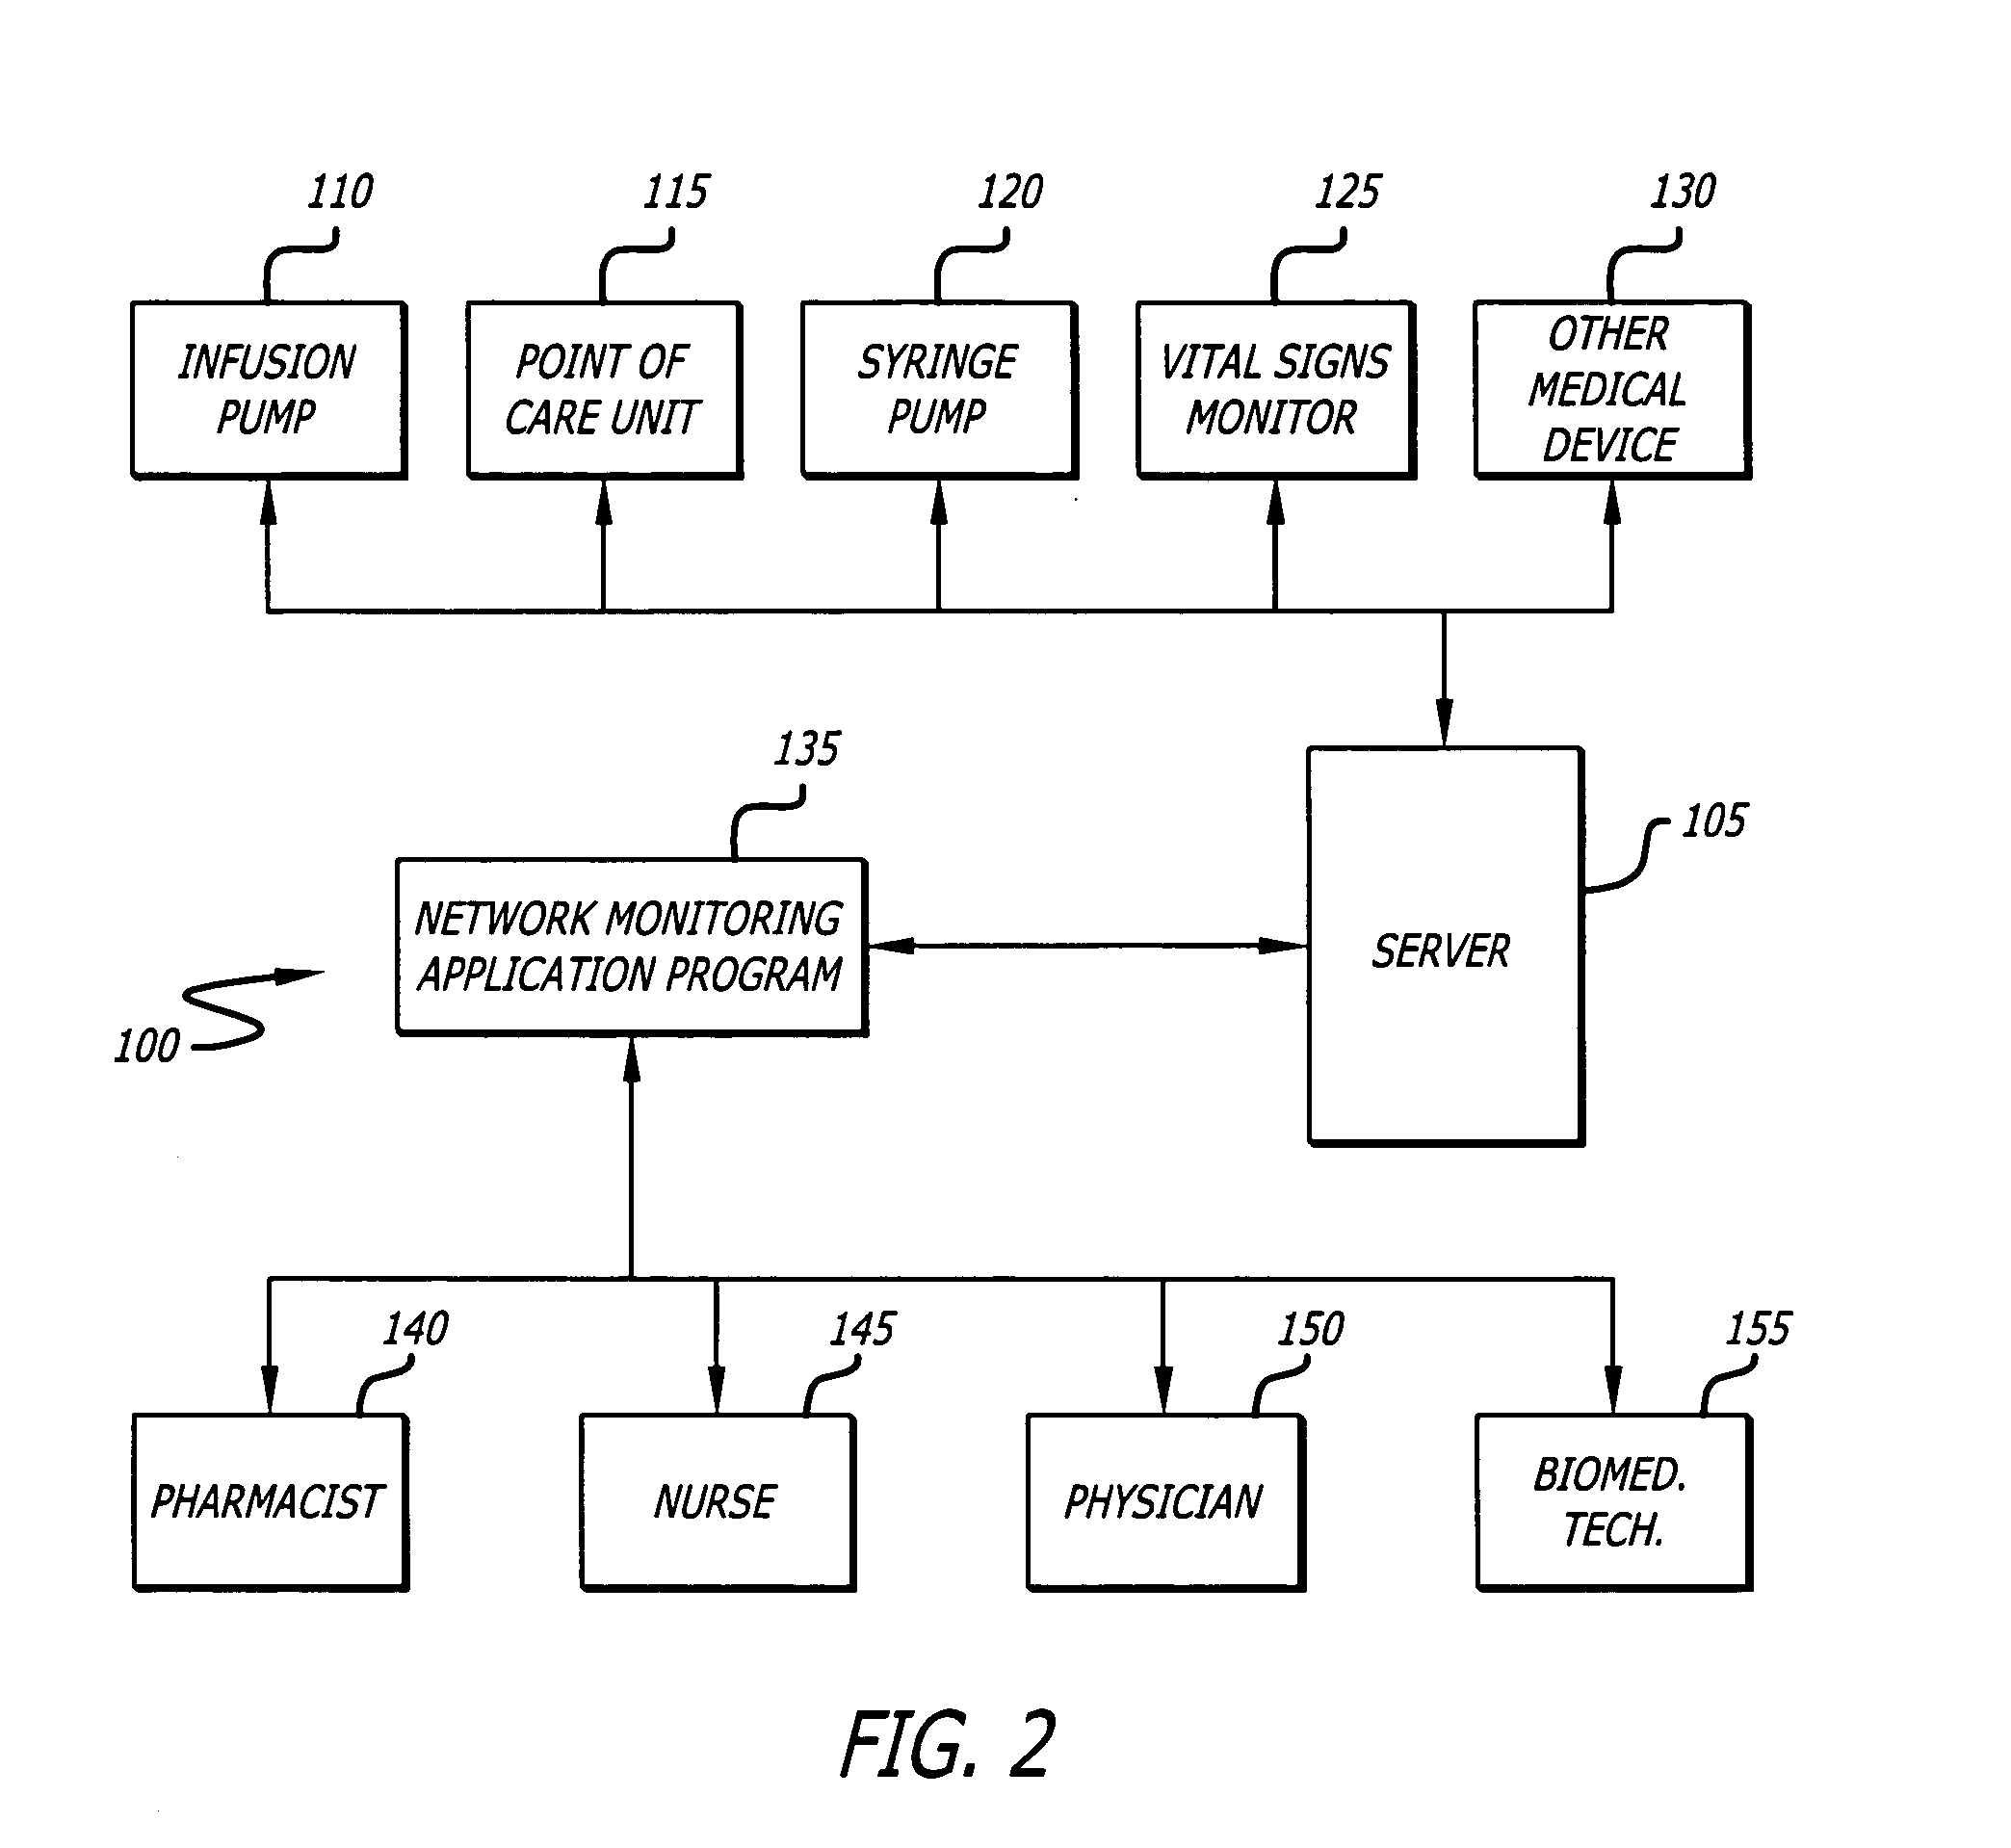 System and method for network monitoring of multiple medical devices